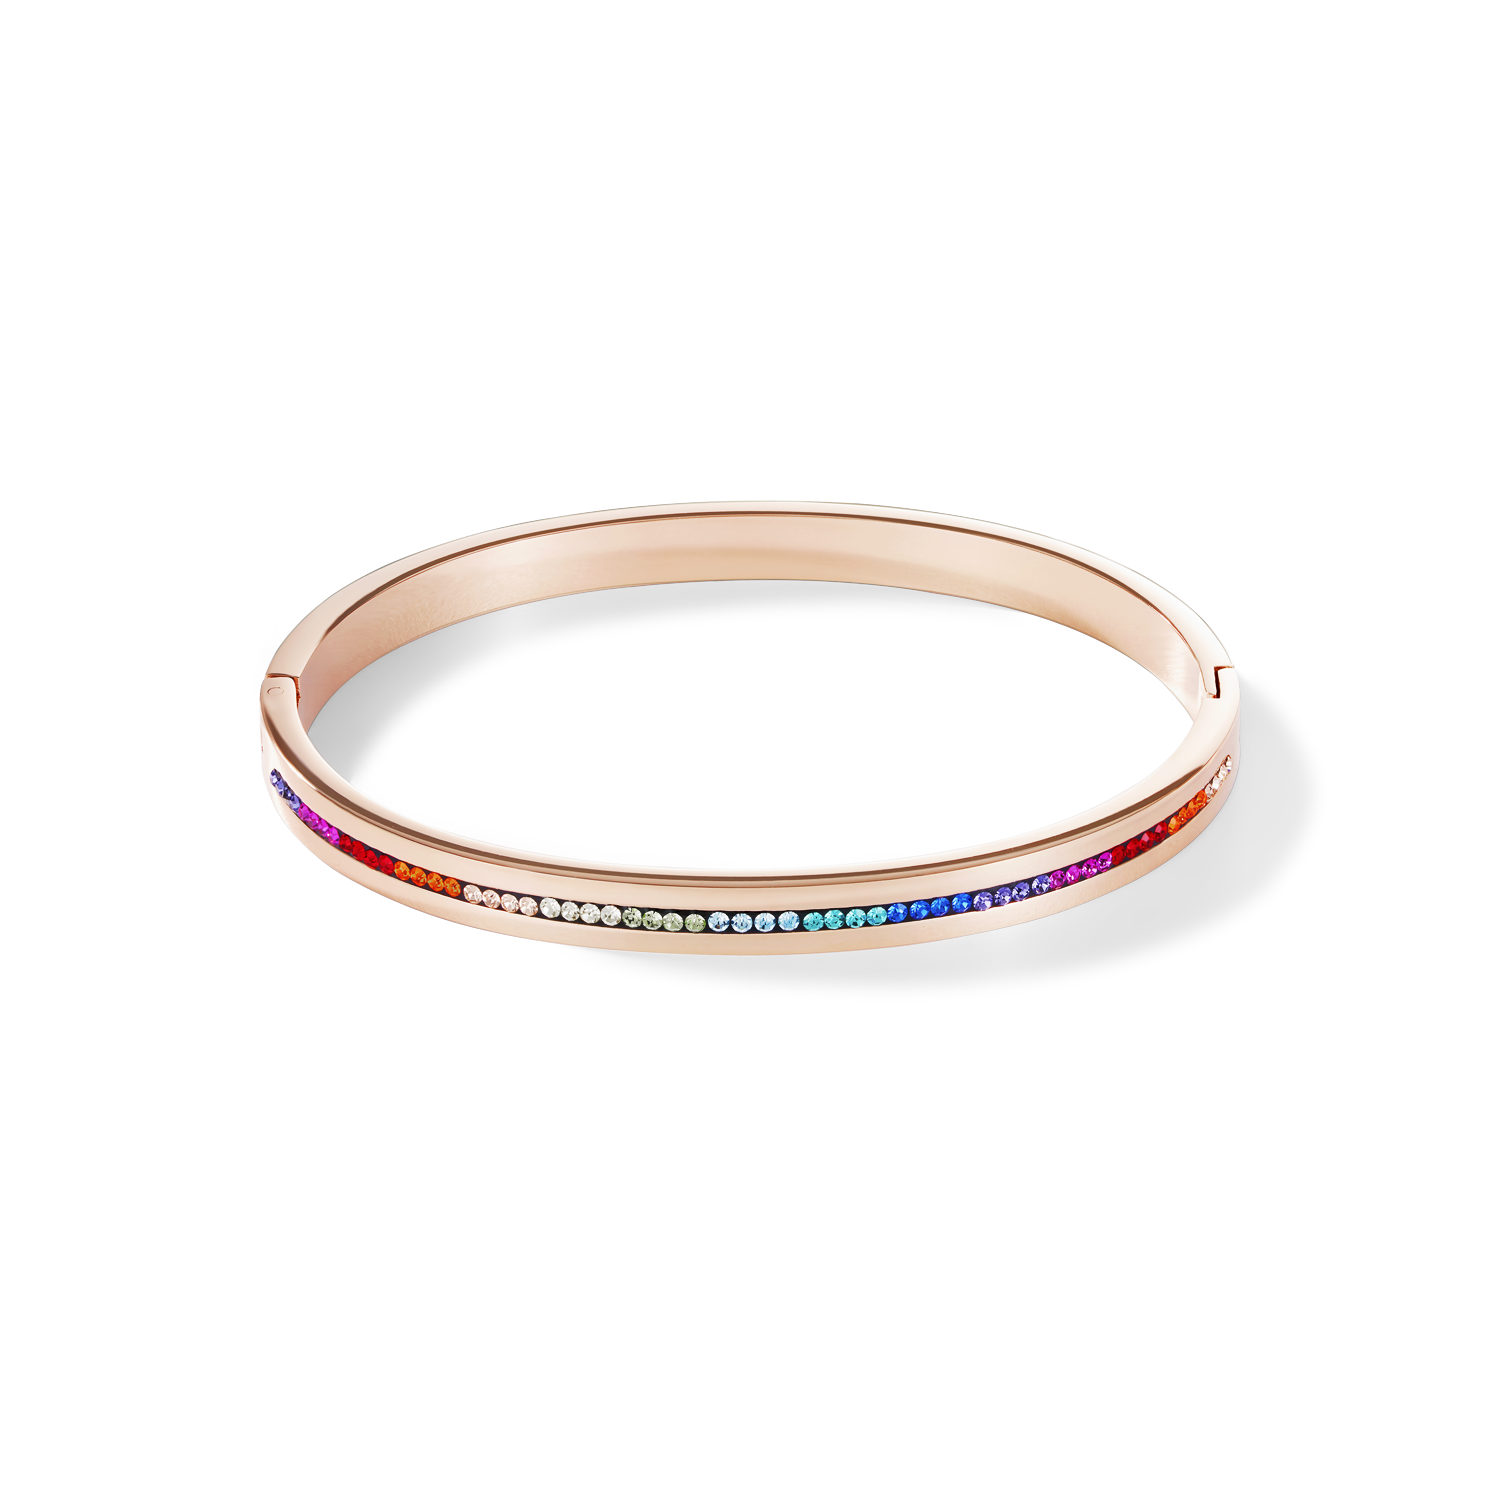 Bangle stainless steel rose gold & crystals pavé strip multicolour 17